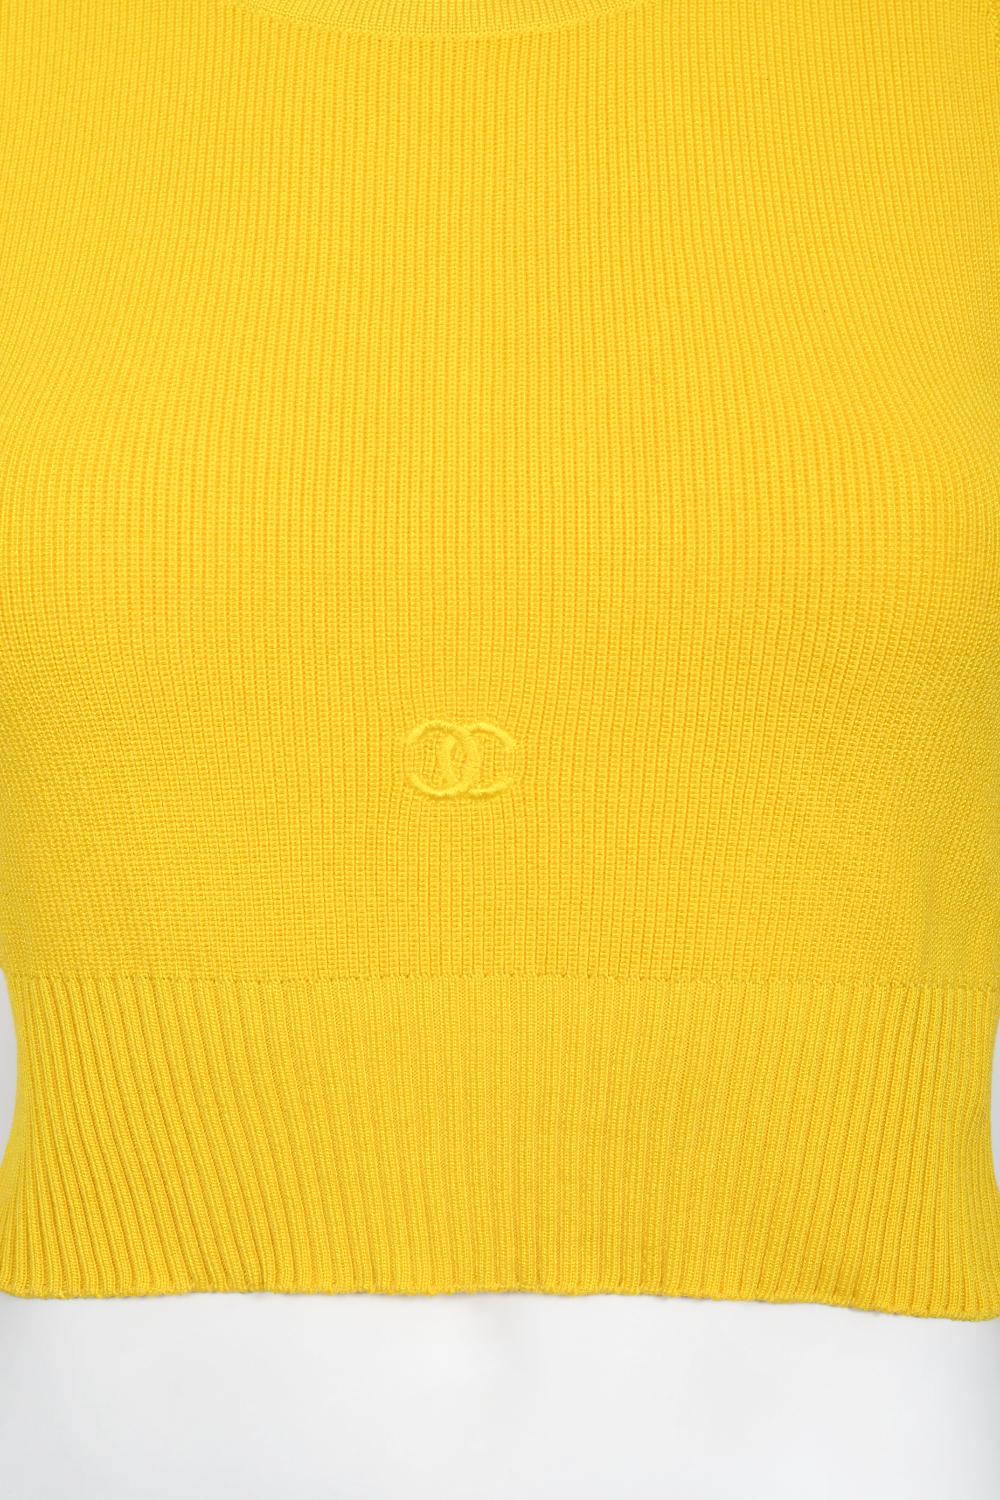 Vintage 1996 Chanel by Karl Lagerfeld Runway Yellow Knit Cropped Sweater Set  5